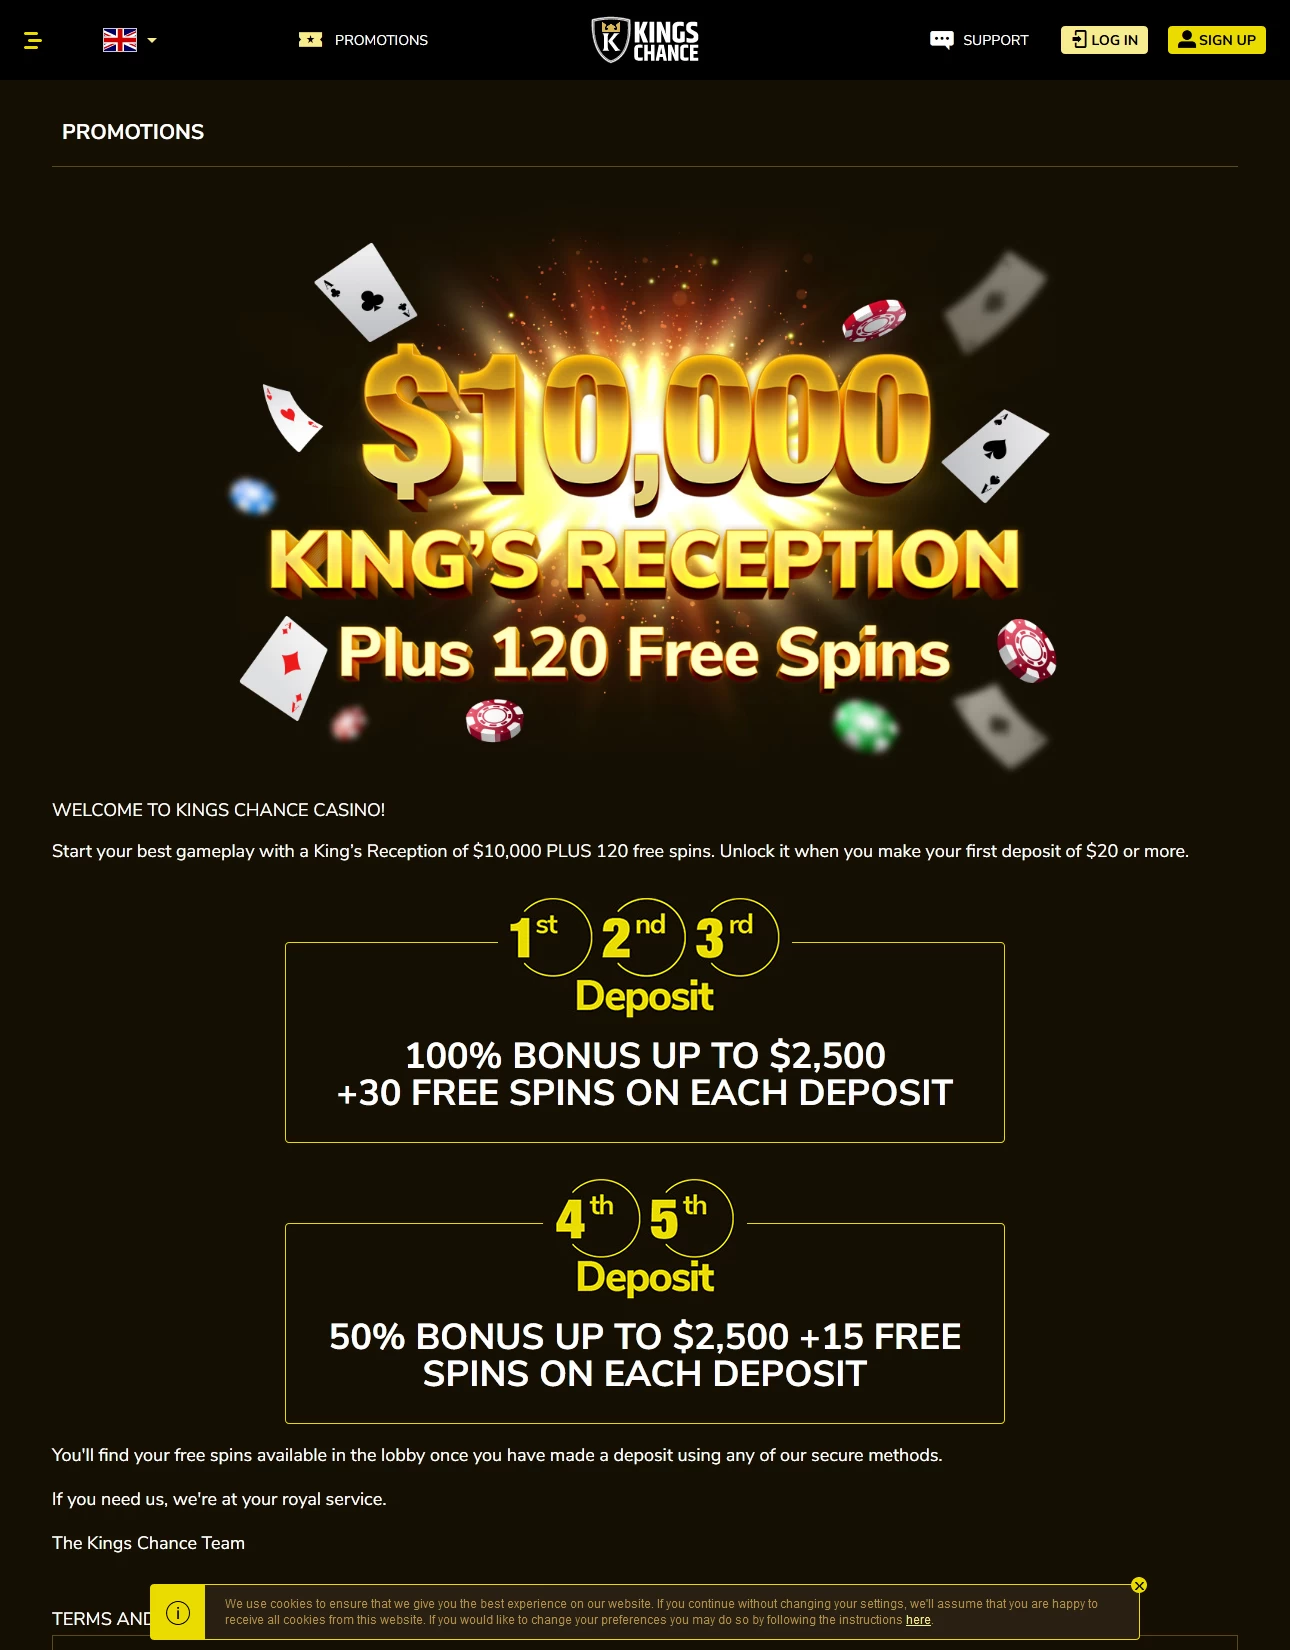 kings chance casino free spins